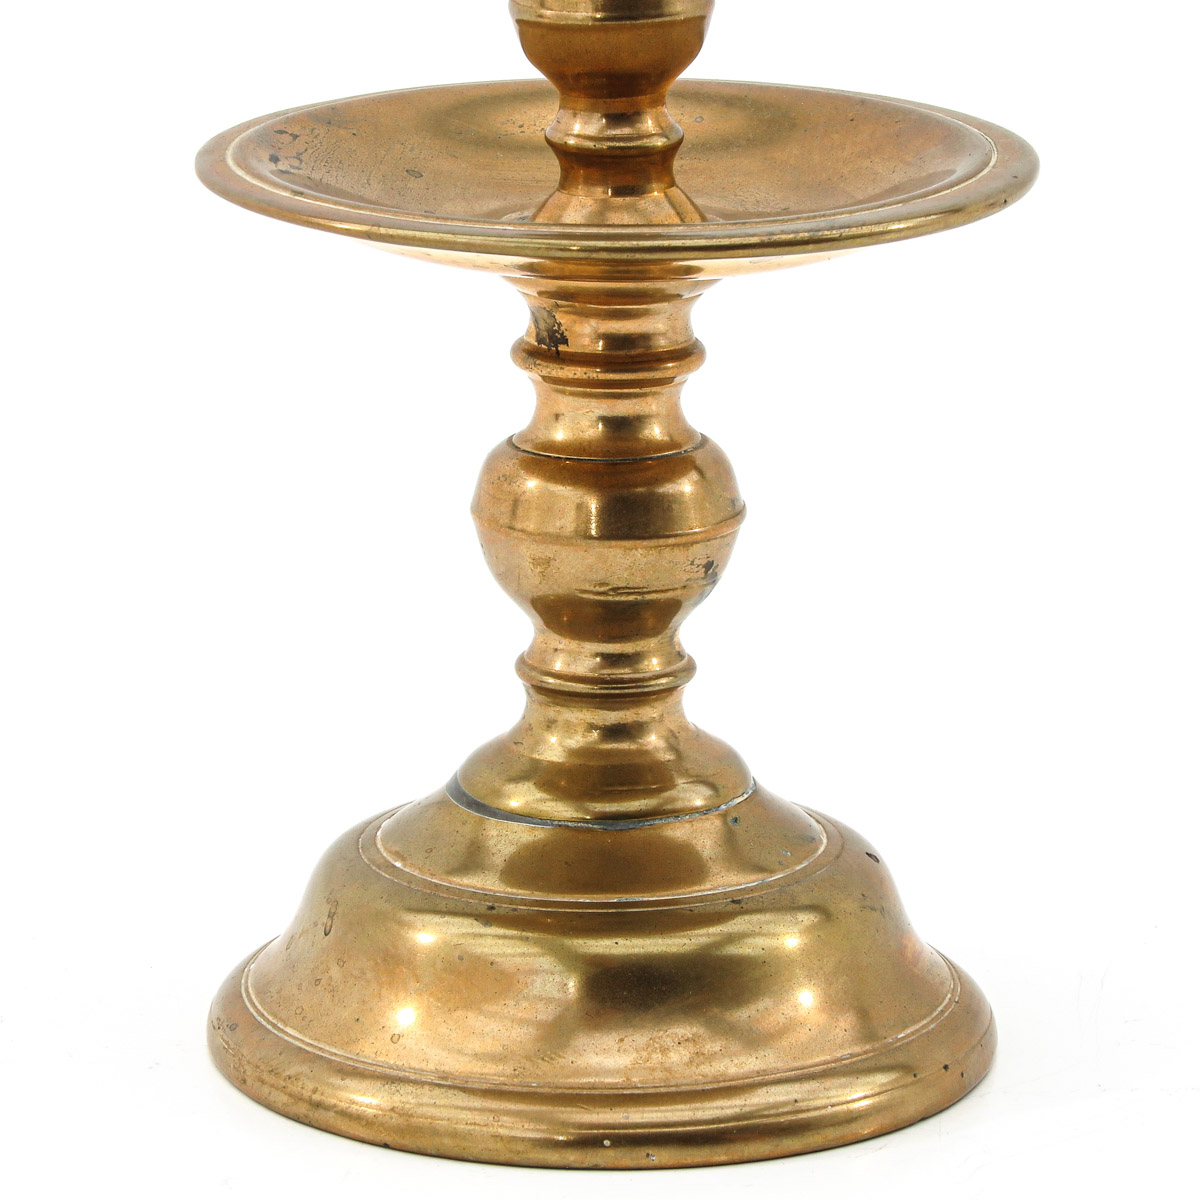 A 17th Century Bronze Candlestick - Image 8 of 8